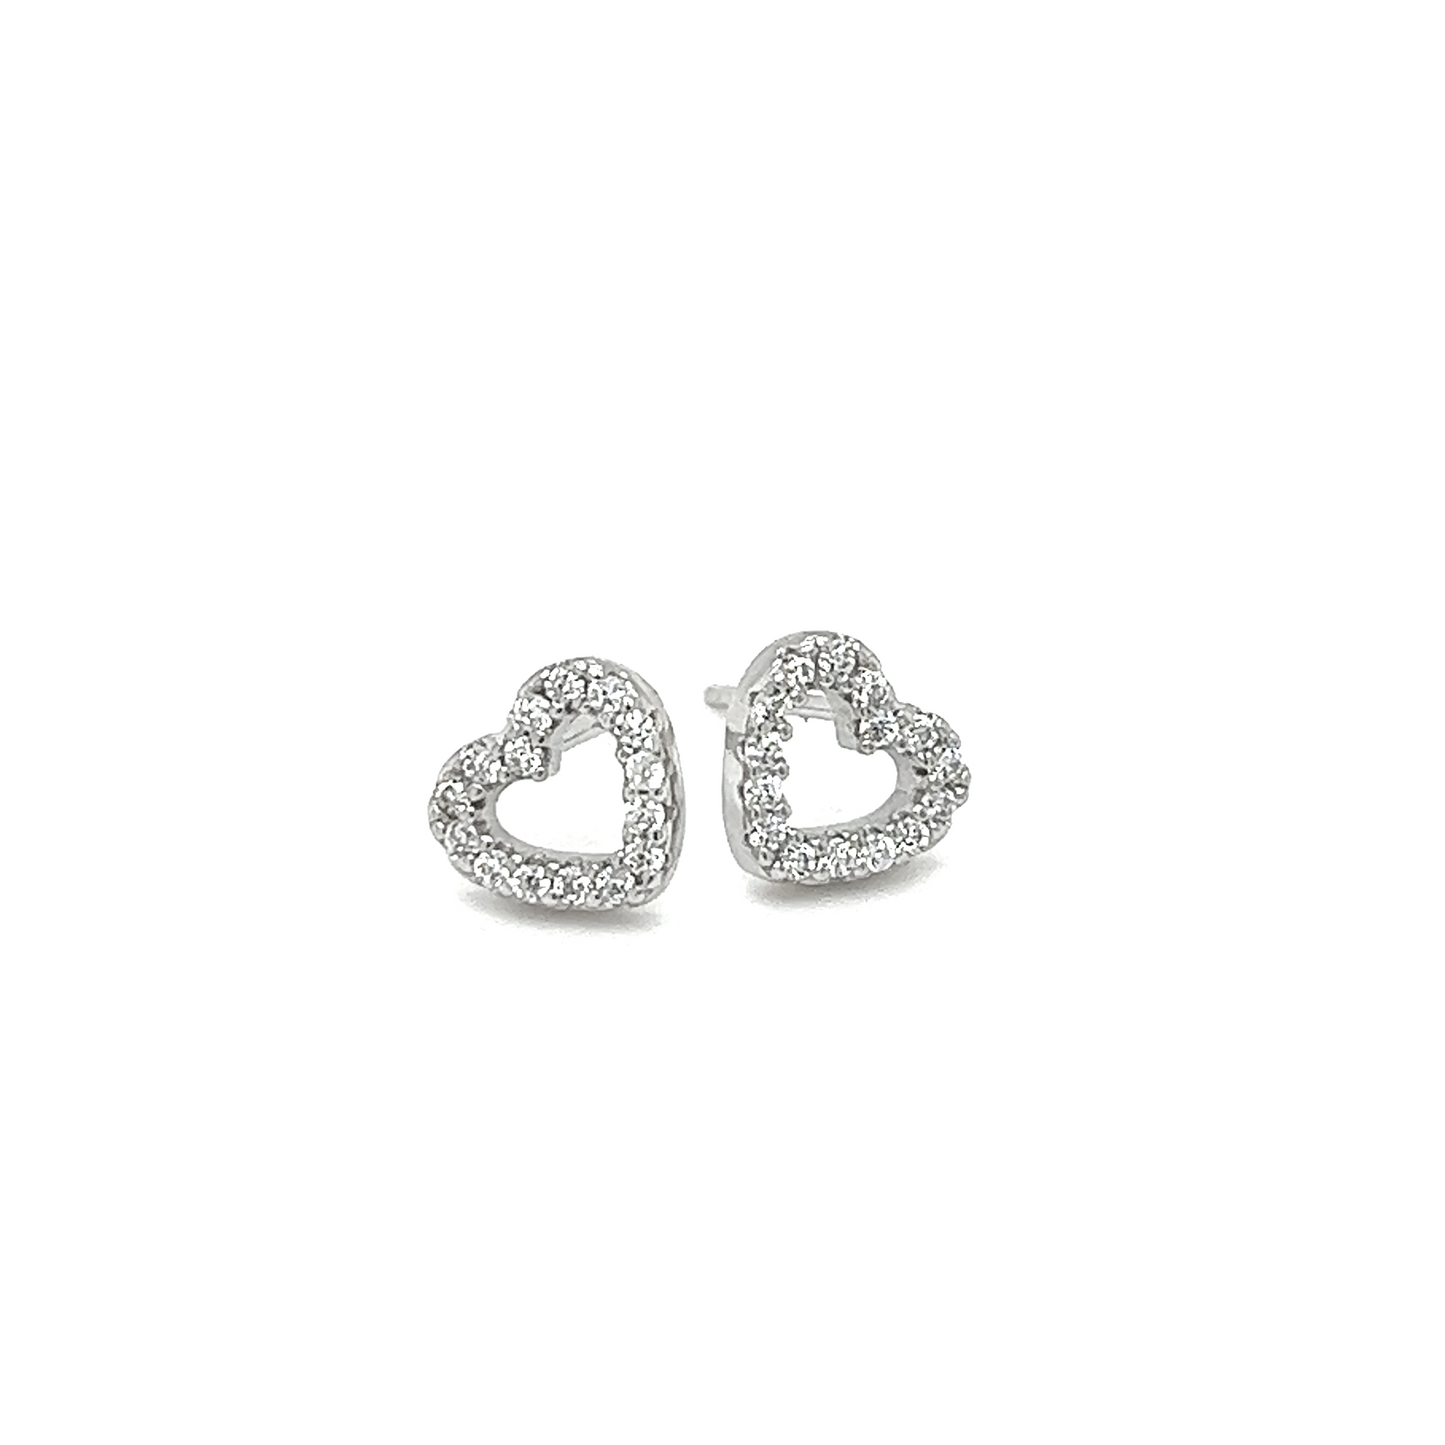 A pair of Super Silver Heart Outline Cubic Zirconia Stud earrings adorned with Cubic Zirconia on a white background.